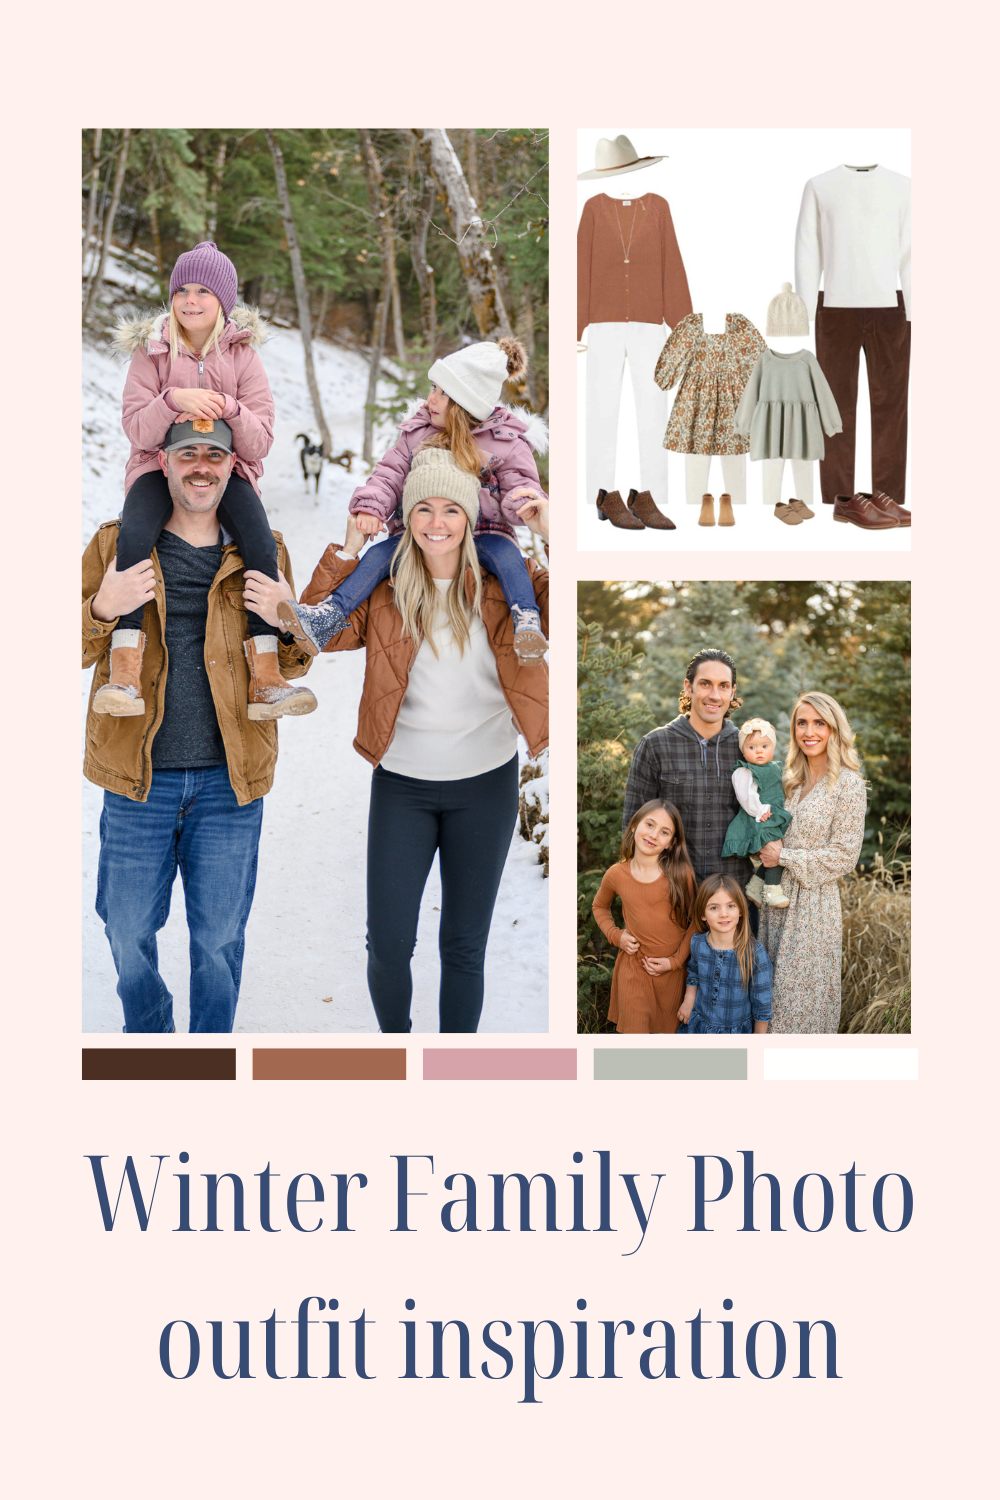 Utah family photography winter family photo outfits for Christmas Tree Family mini sessions taken by a utah family photographer in a forest in Alpine, UT.